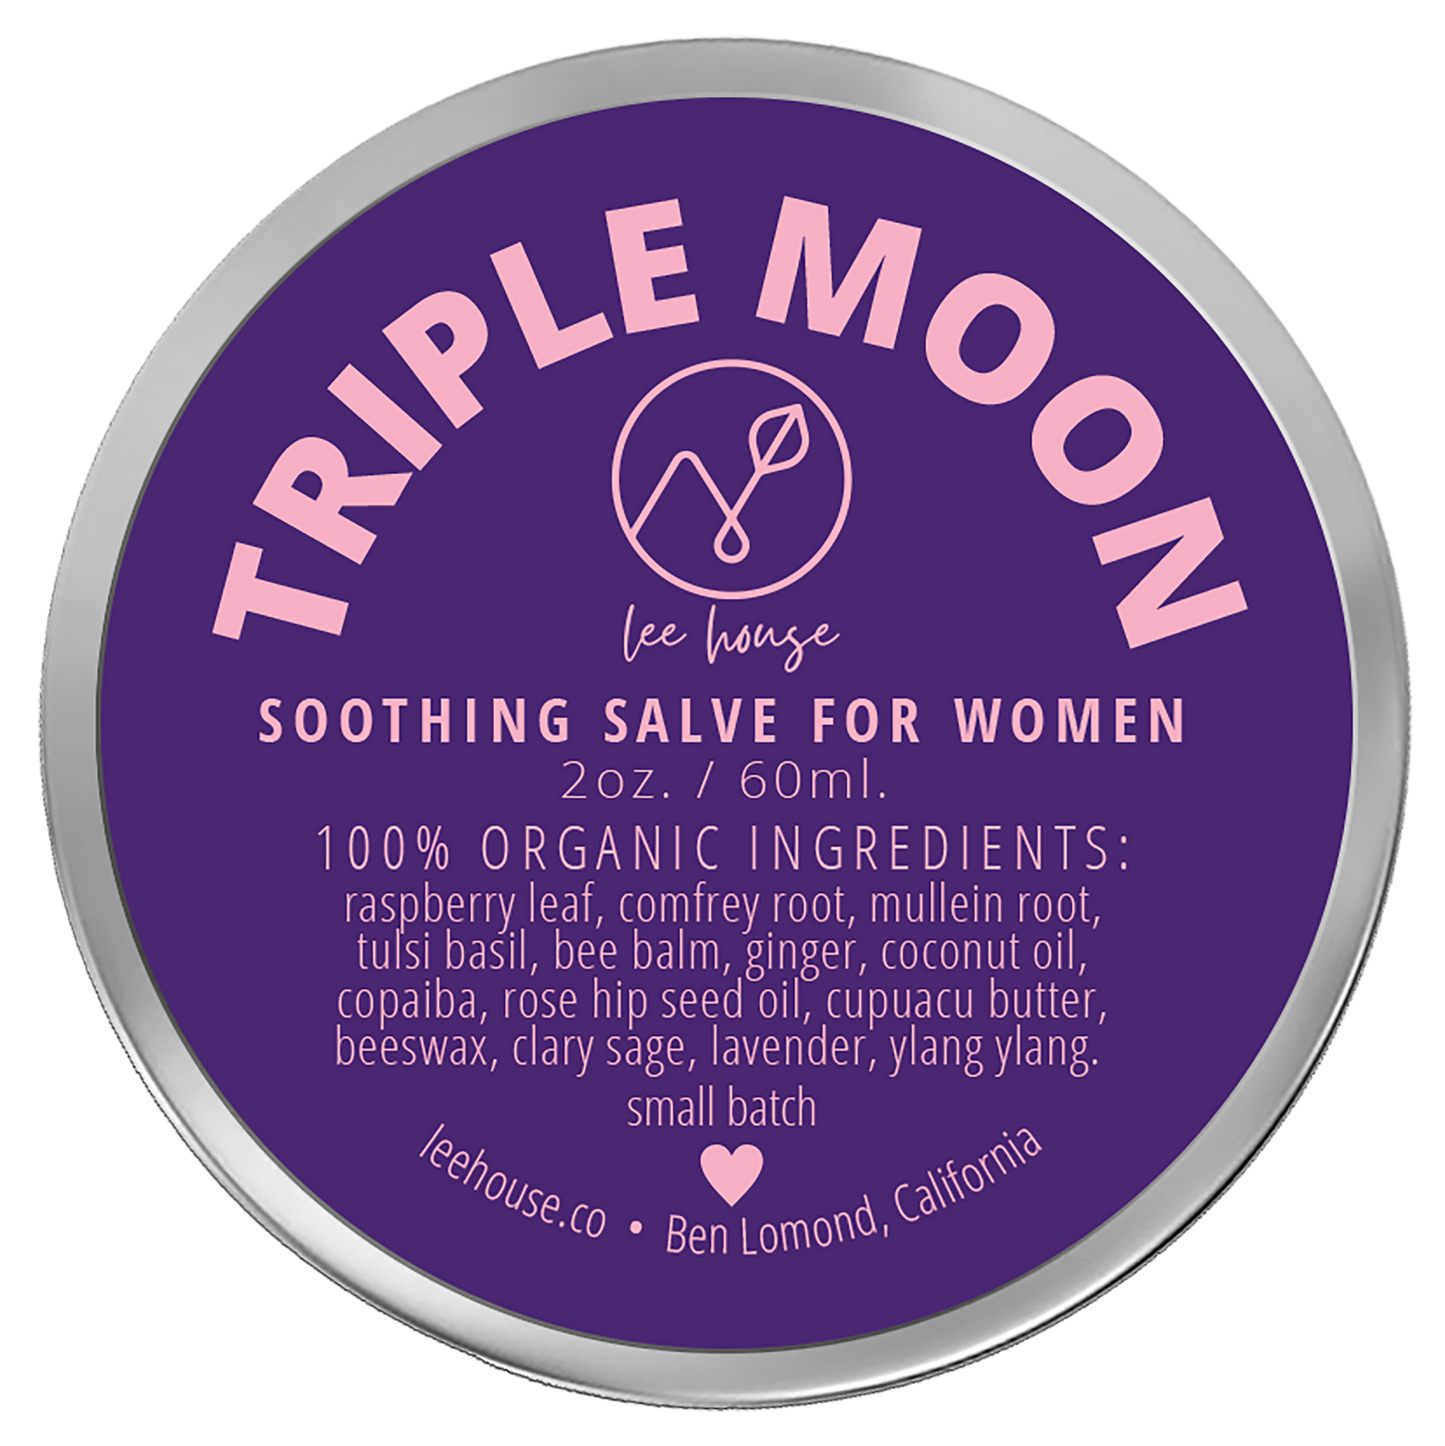 photo of a 2 oz tin of triple moon soothing balm for women depciting a purple and pin label that reads: 100% organic ingredients: raspberry Leaf, comfrey root, mullein root, tulsi basil, bee balm, ginger, coconut oil, copaiba, rose hip seed oil, cupuacu butter, beeswax, clary sage, lavender, ylang ylang. External Use Only. handcrafted with love, leehouse.co